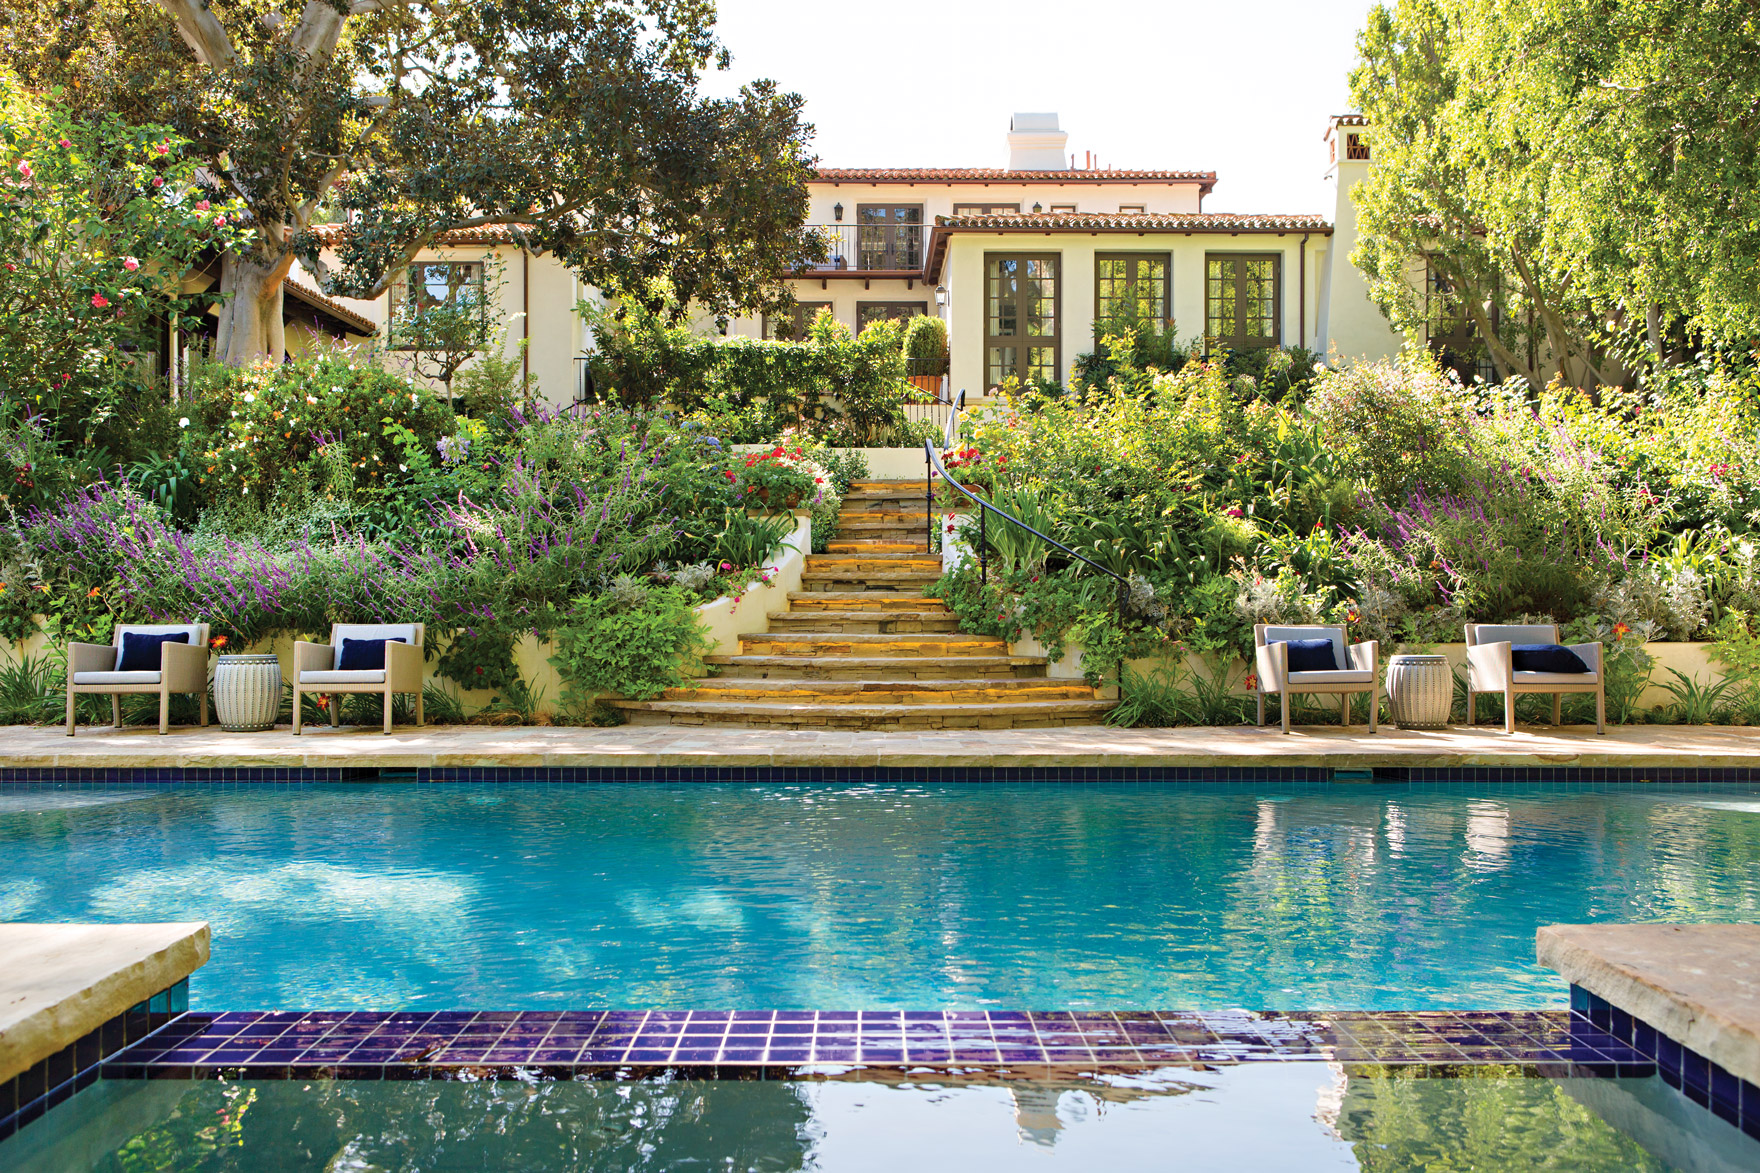 The swimming pool outside actress Linda Christian's former Bel-Air home.